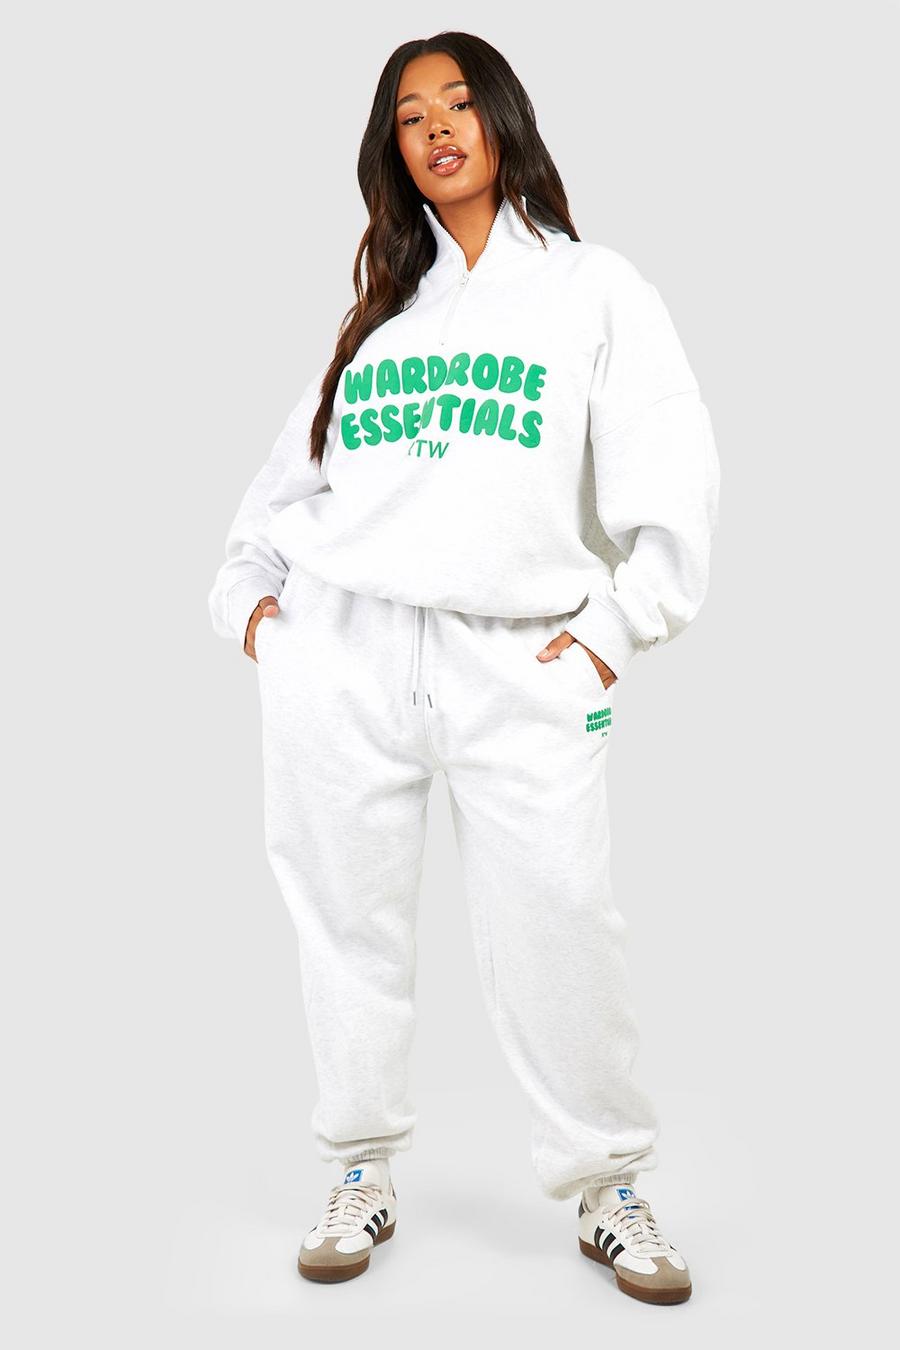 Plus Size Women's Two Piece Sweatsuit Outfits Spring And Fall Loose Casual  Joggers S-4XL Fashion 2 Piece Pleated Tracksuit Sets